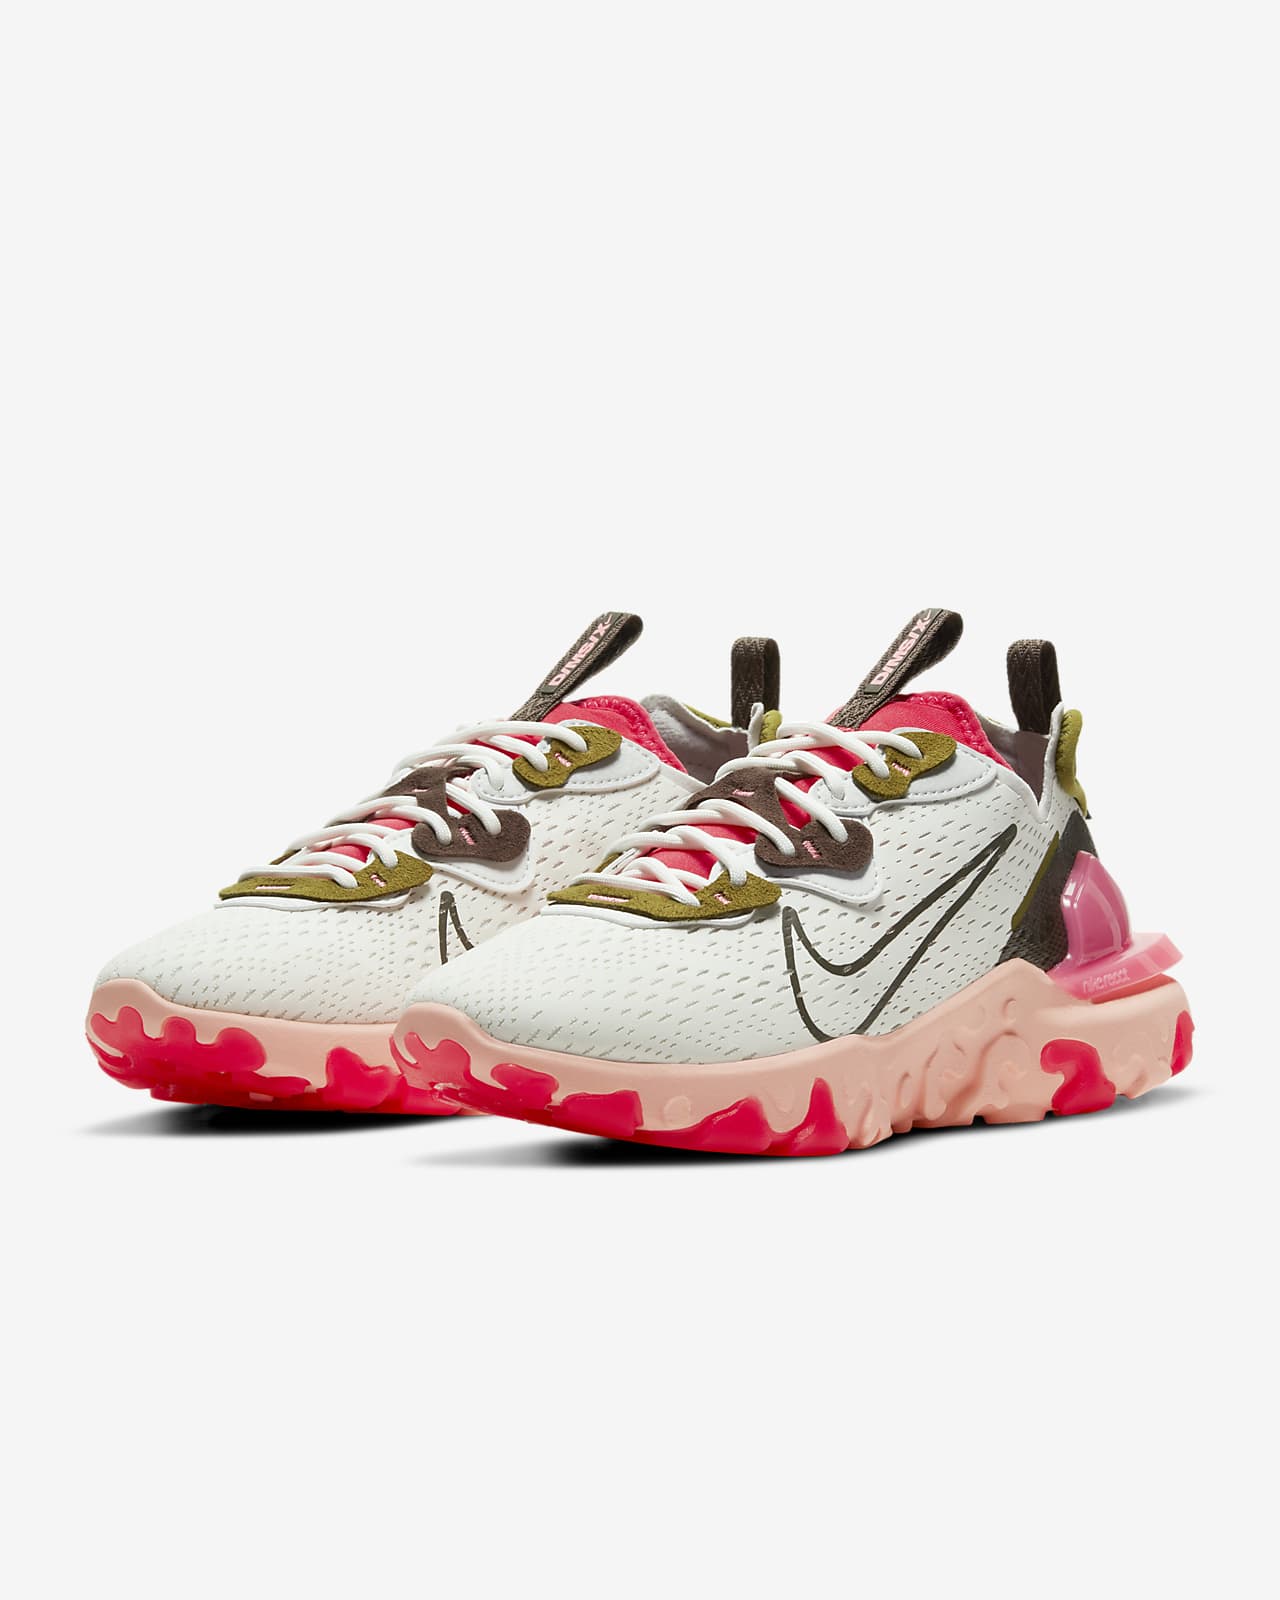 Buy nike red and white women's shoes cheap online